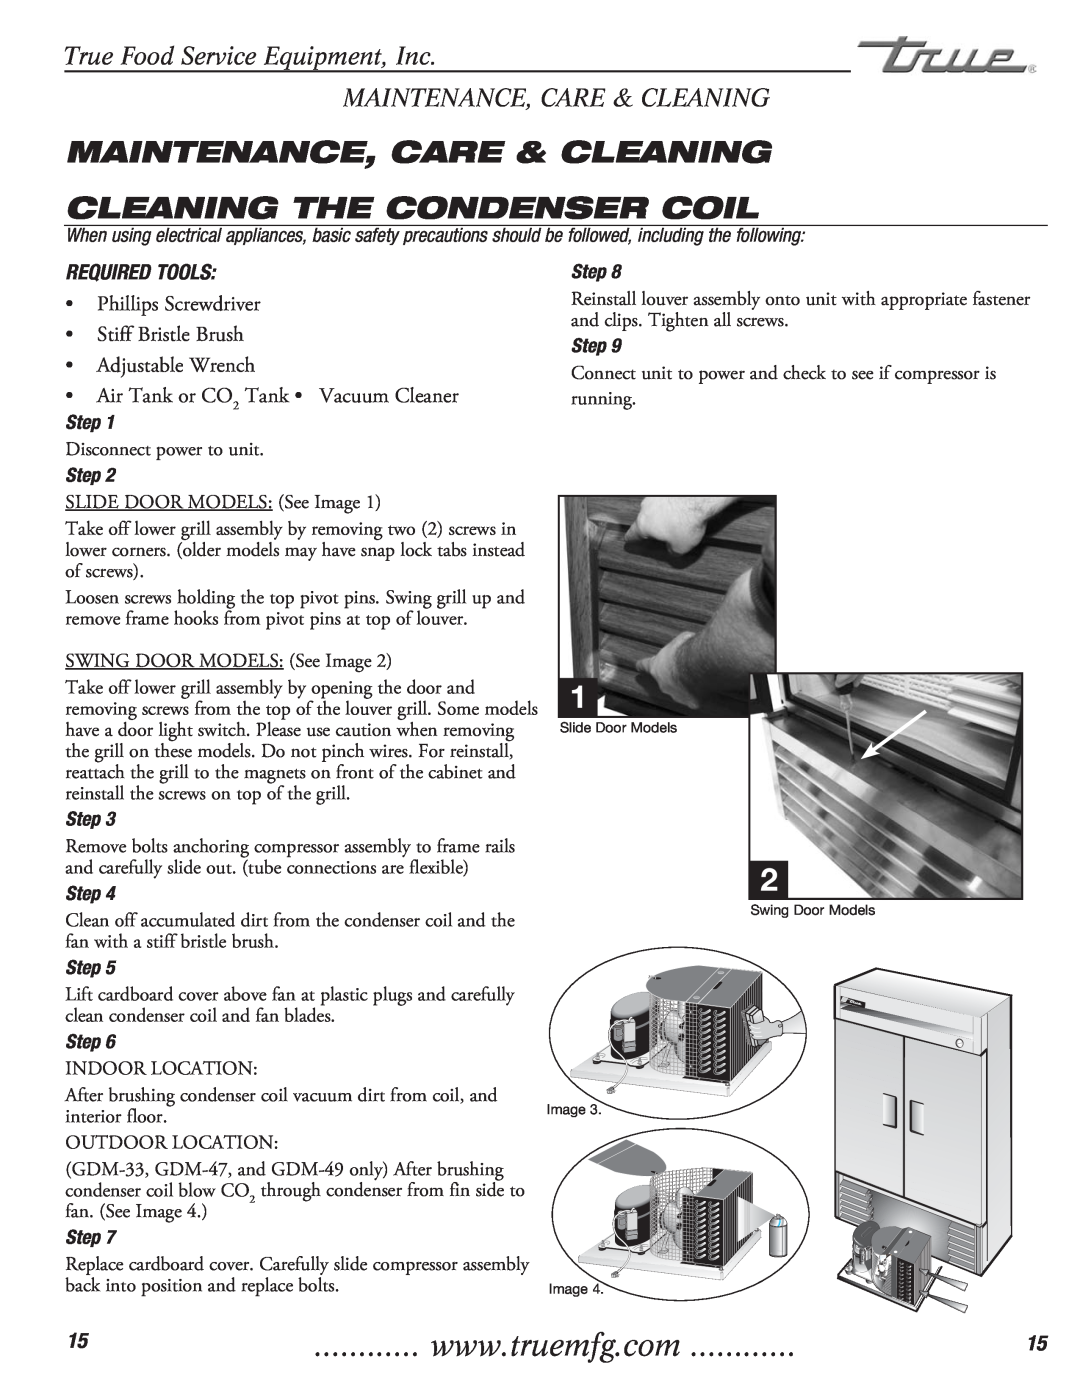 True Manufacturing Company T-23DT installation manual Maintenance, Care & Cleaning Cleaning The Condenser Coil, Step 